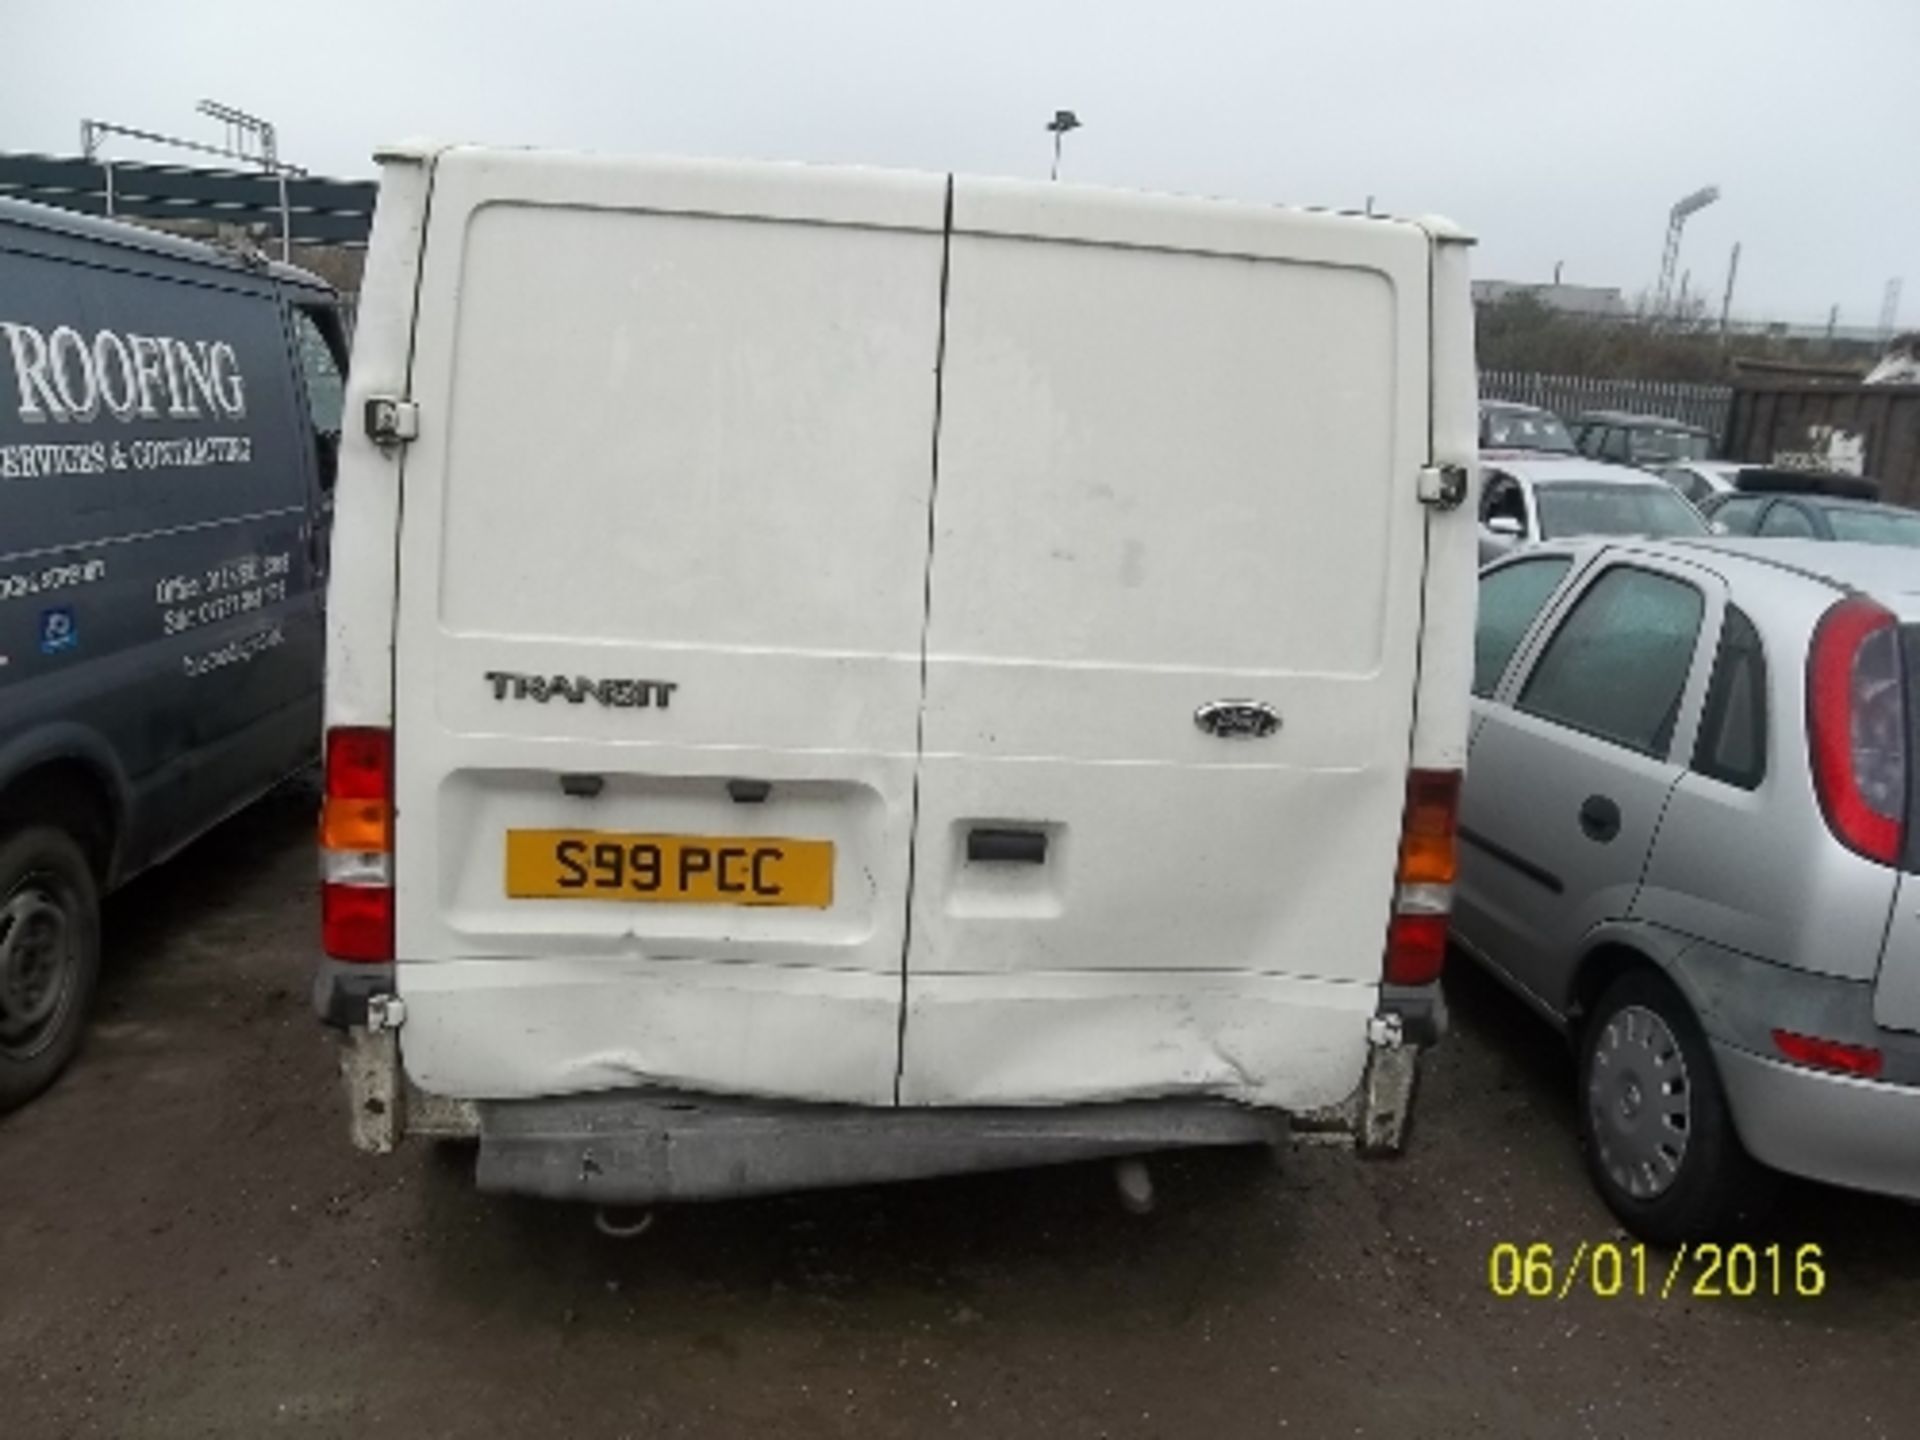 Ford Transit 260 SWB Panel Van - S99 PCC This vehicle may be purchased only by the holder of an - Image 3 of 4